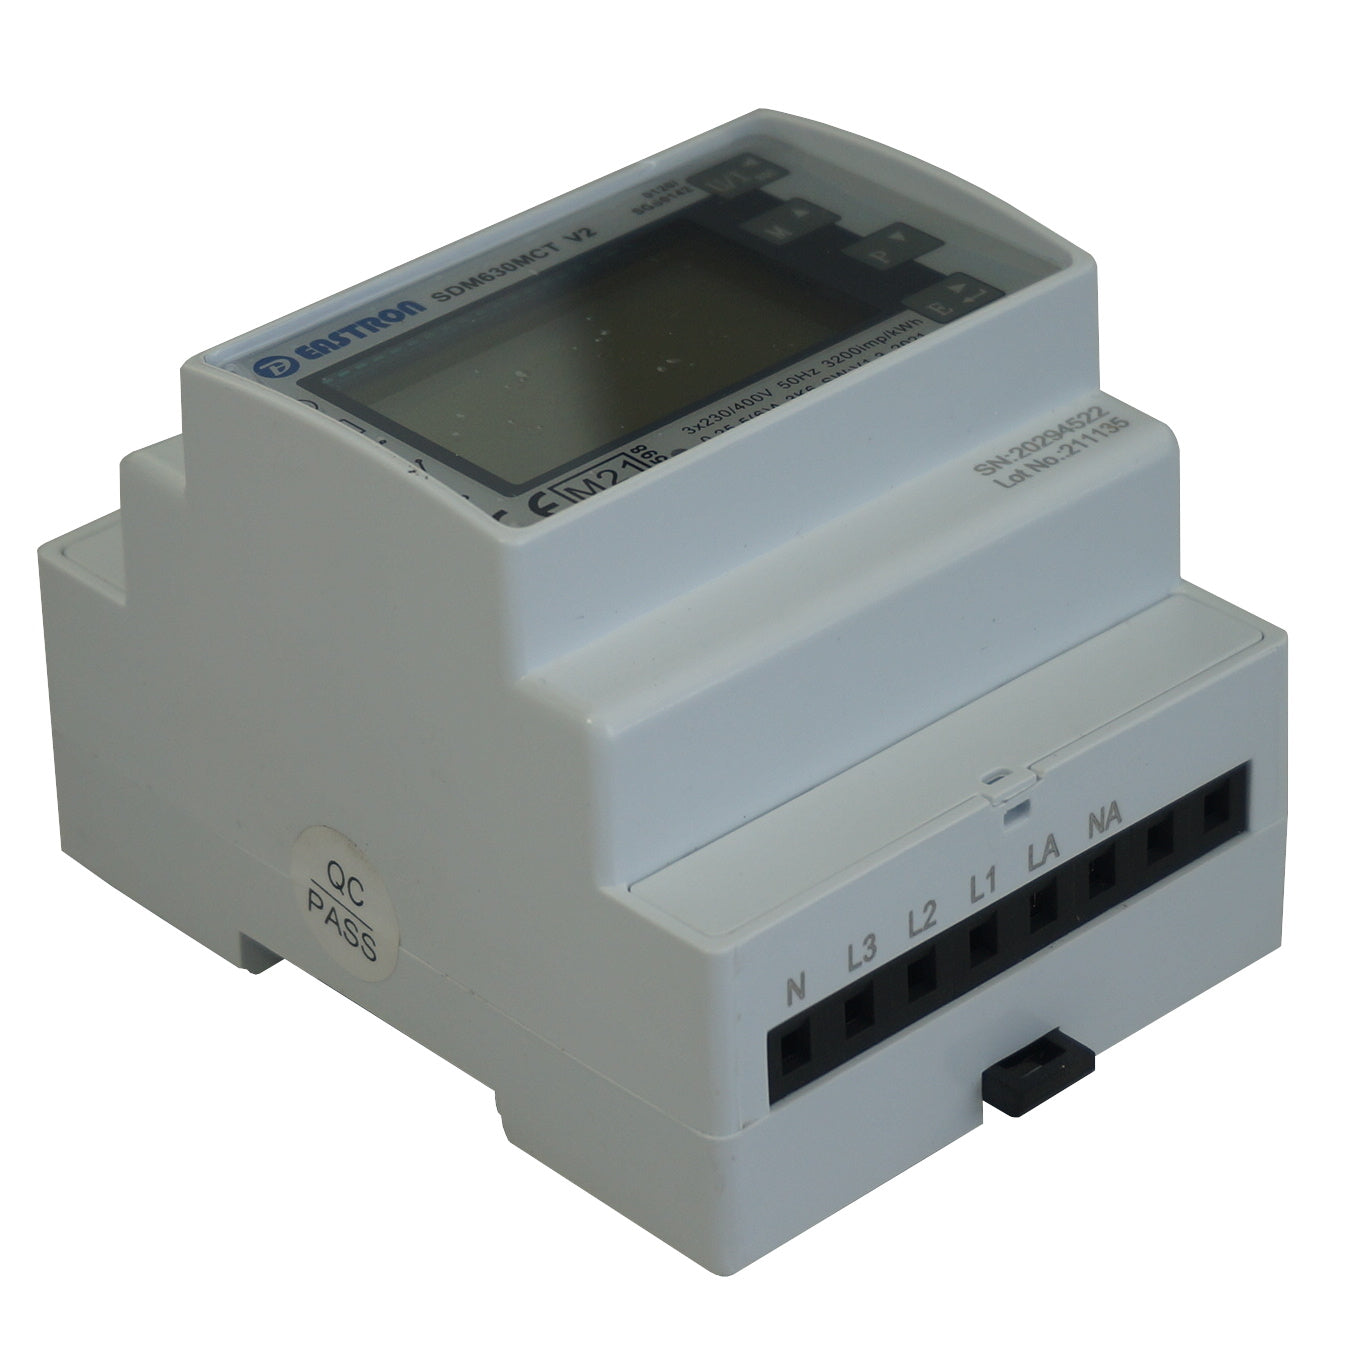 SDM630MCT Modbus-CL1 V2-GROWATT-SOLAX, DIN Rail Mount kWh Meter, 3 Phase, 240VAC aux, Class 1, 1/5 Amp CT Connect, w/ 2 x pulse outputs and RS485 Modbus RTU Comms